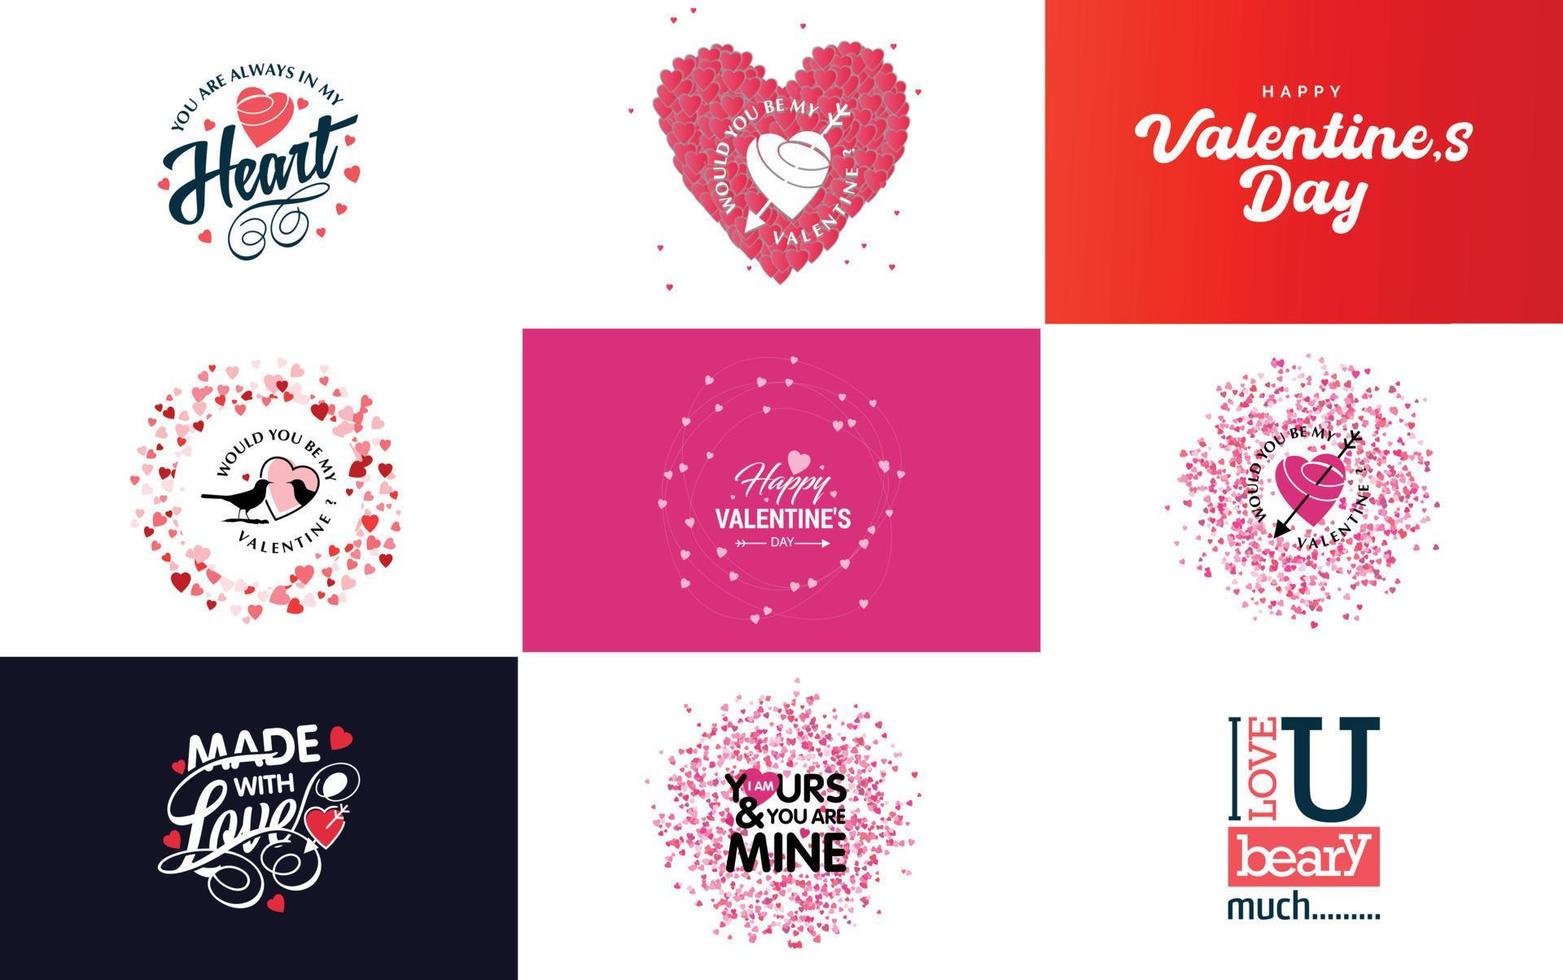 Valentine's hand-drawn lettering with a heart design. suitable for use as a Valentine's Day greeting or in romantic designs vector